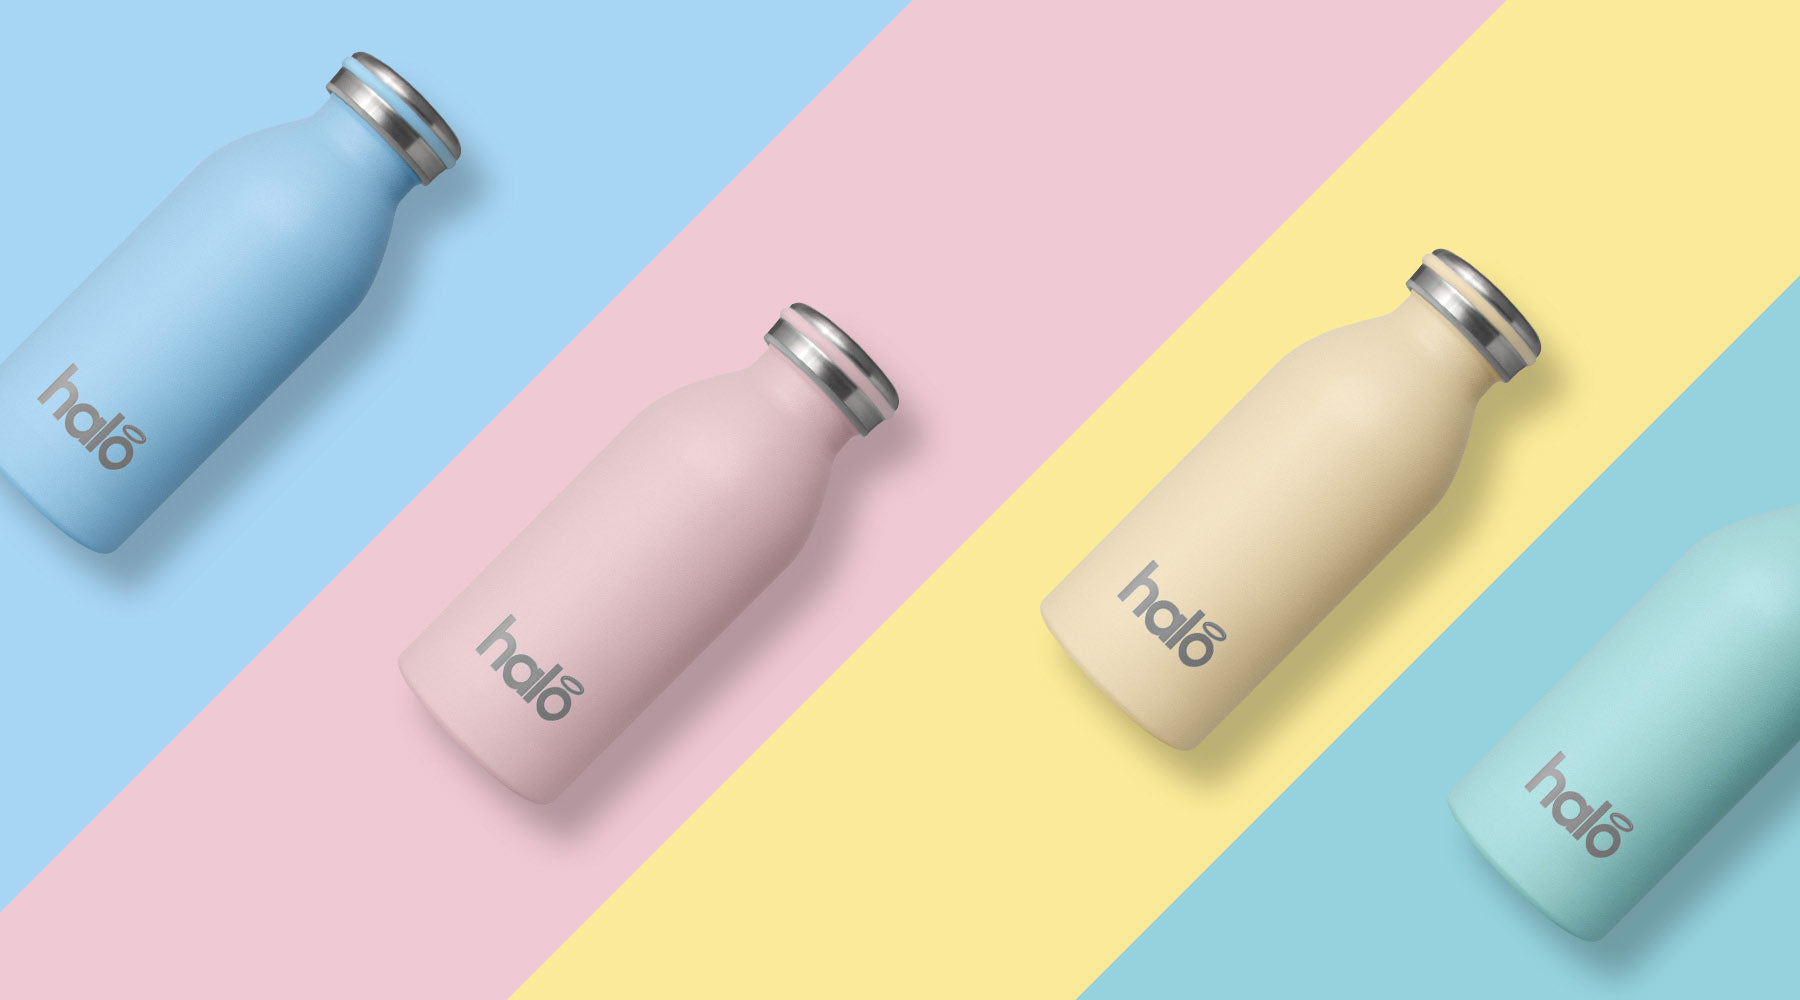 Halo Bottle small reusable bottles in blue, pink, yellow and green.